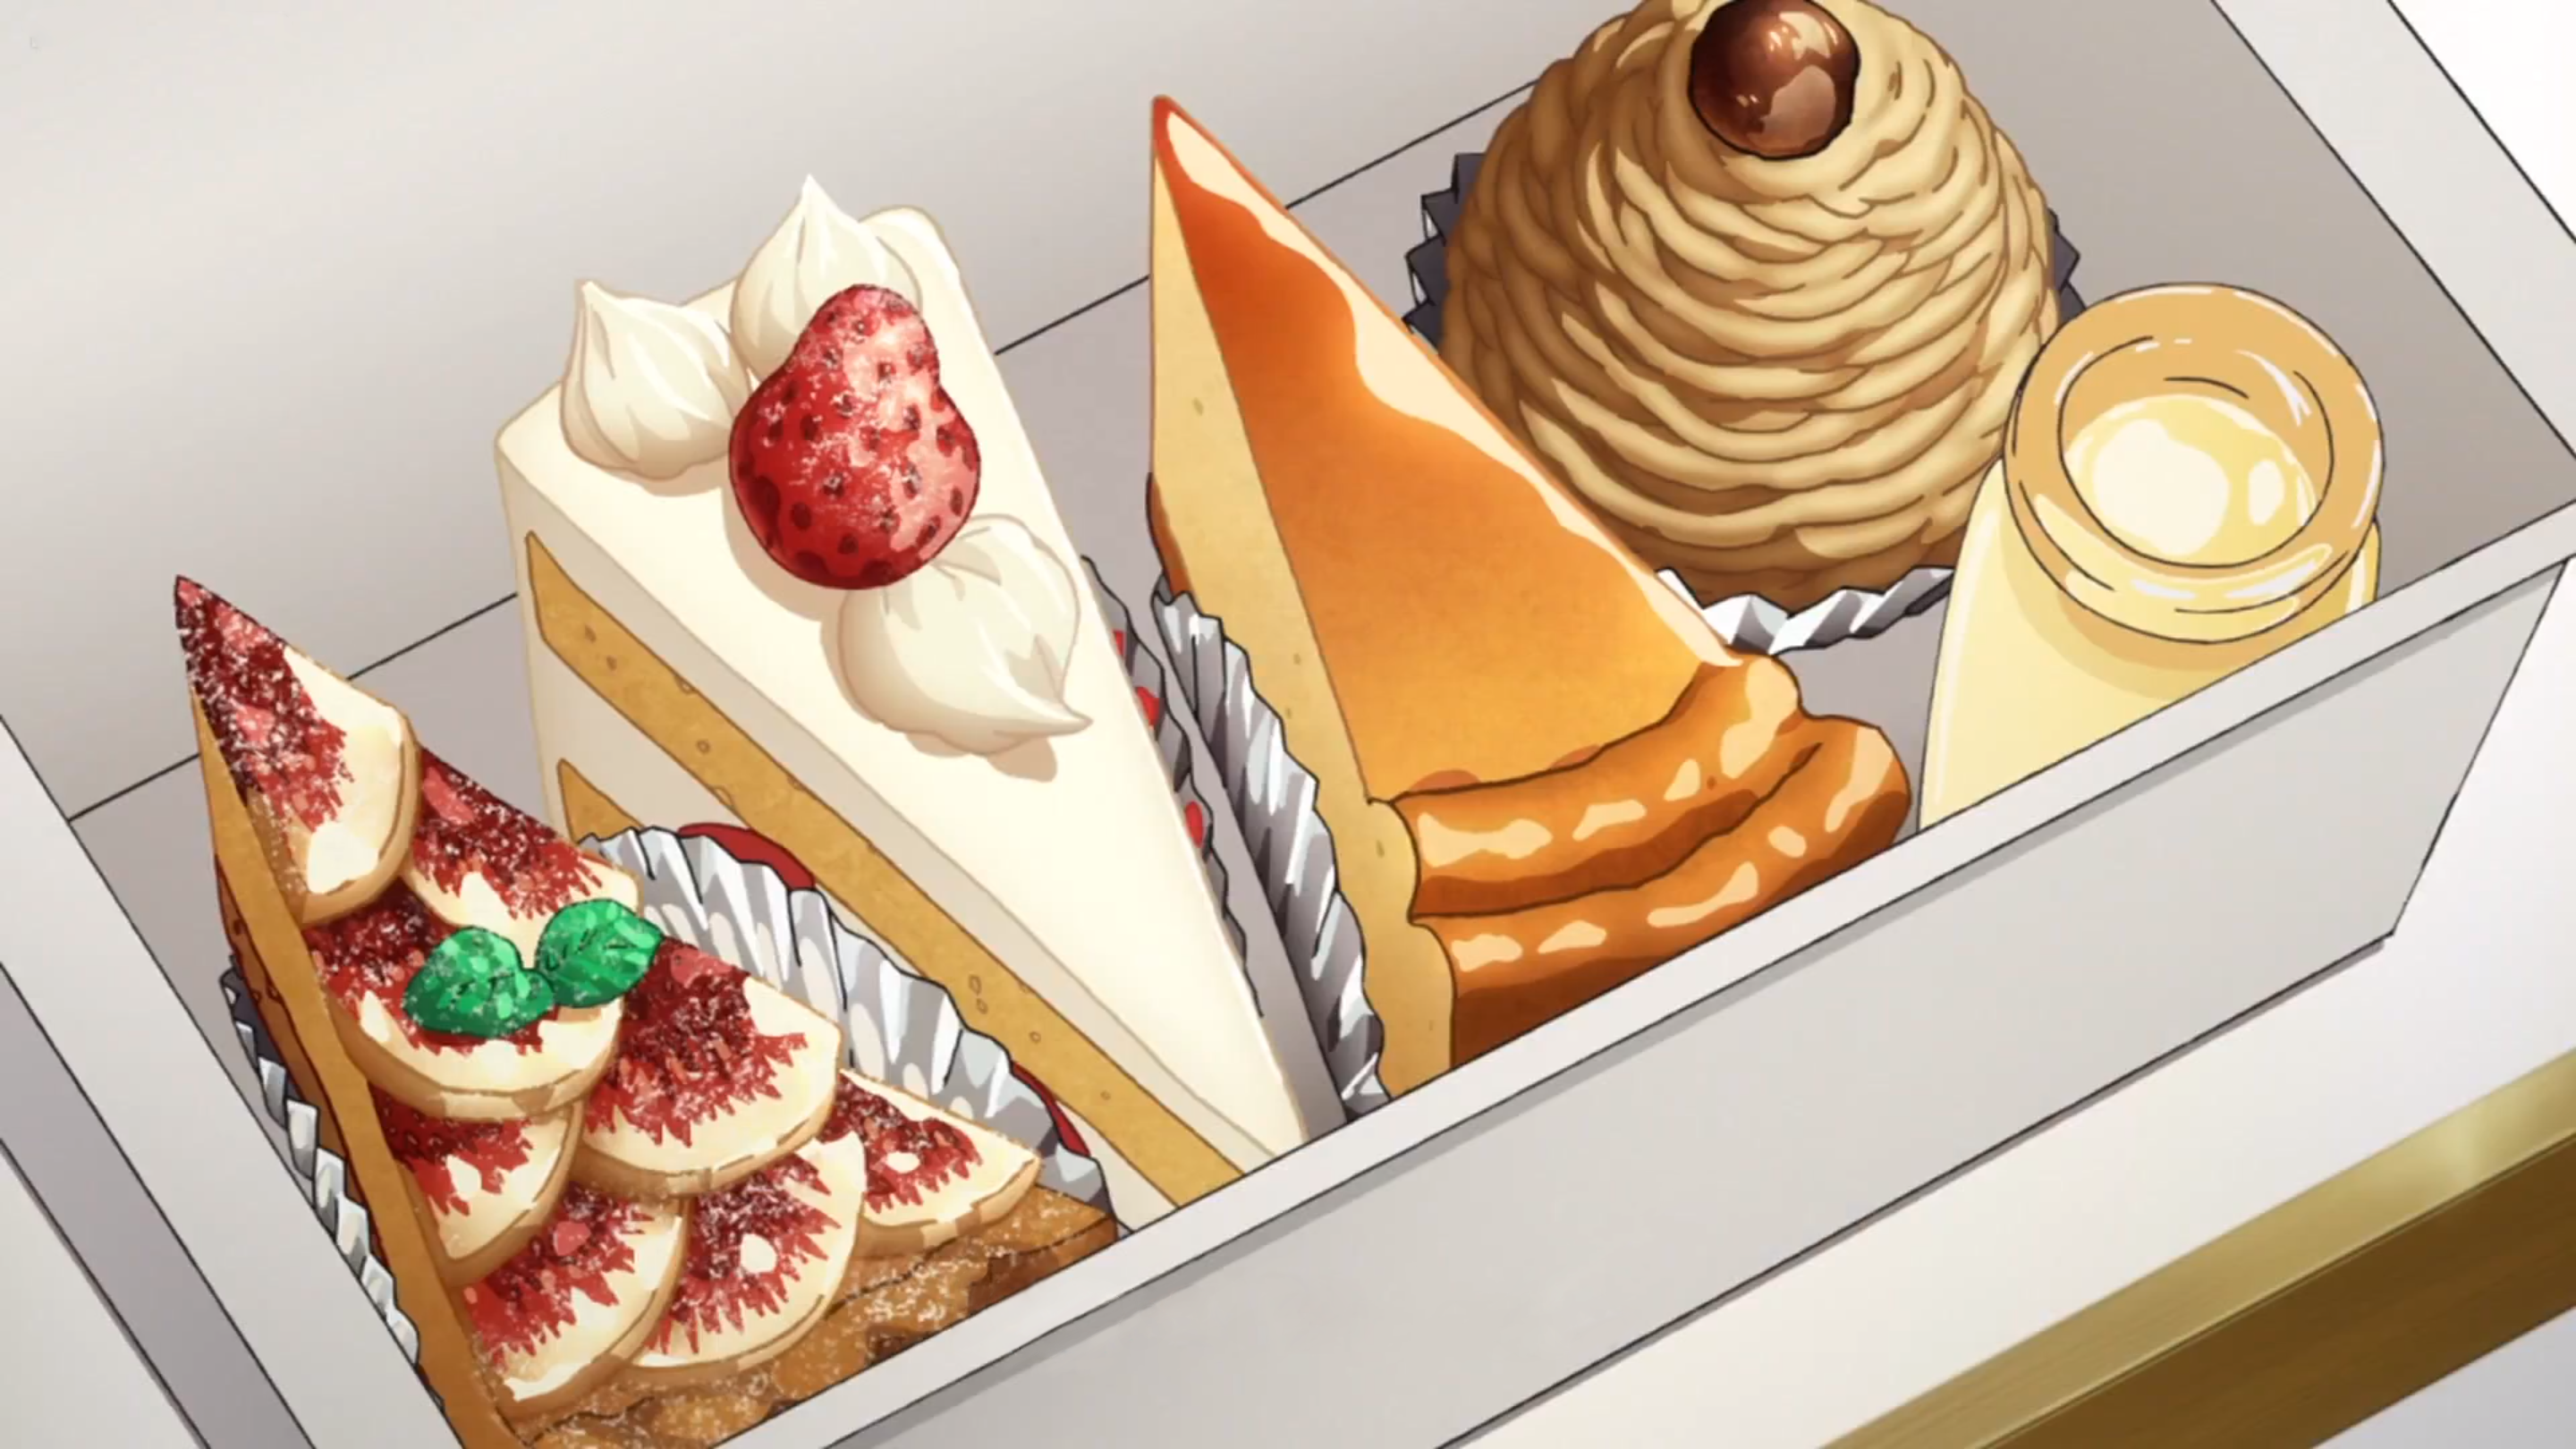 Why does anime food look so good??